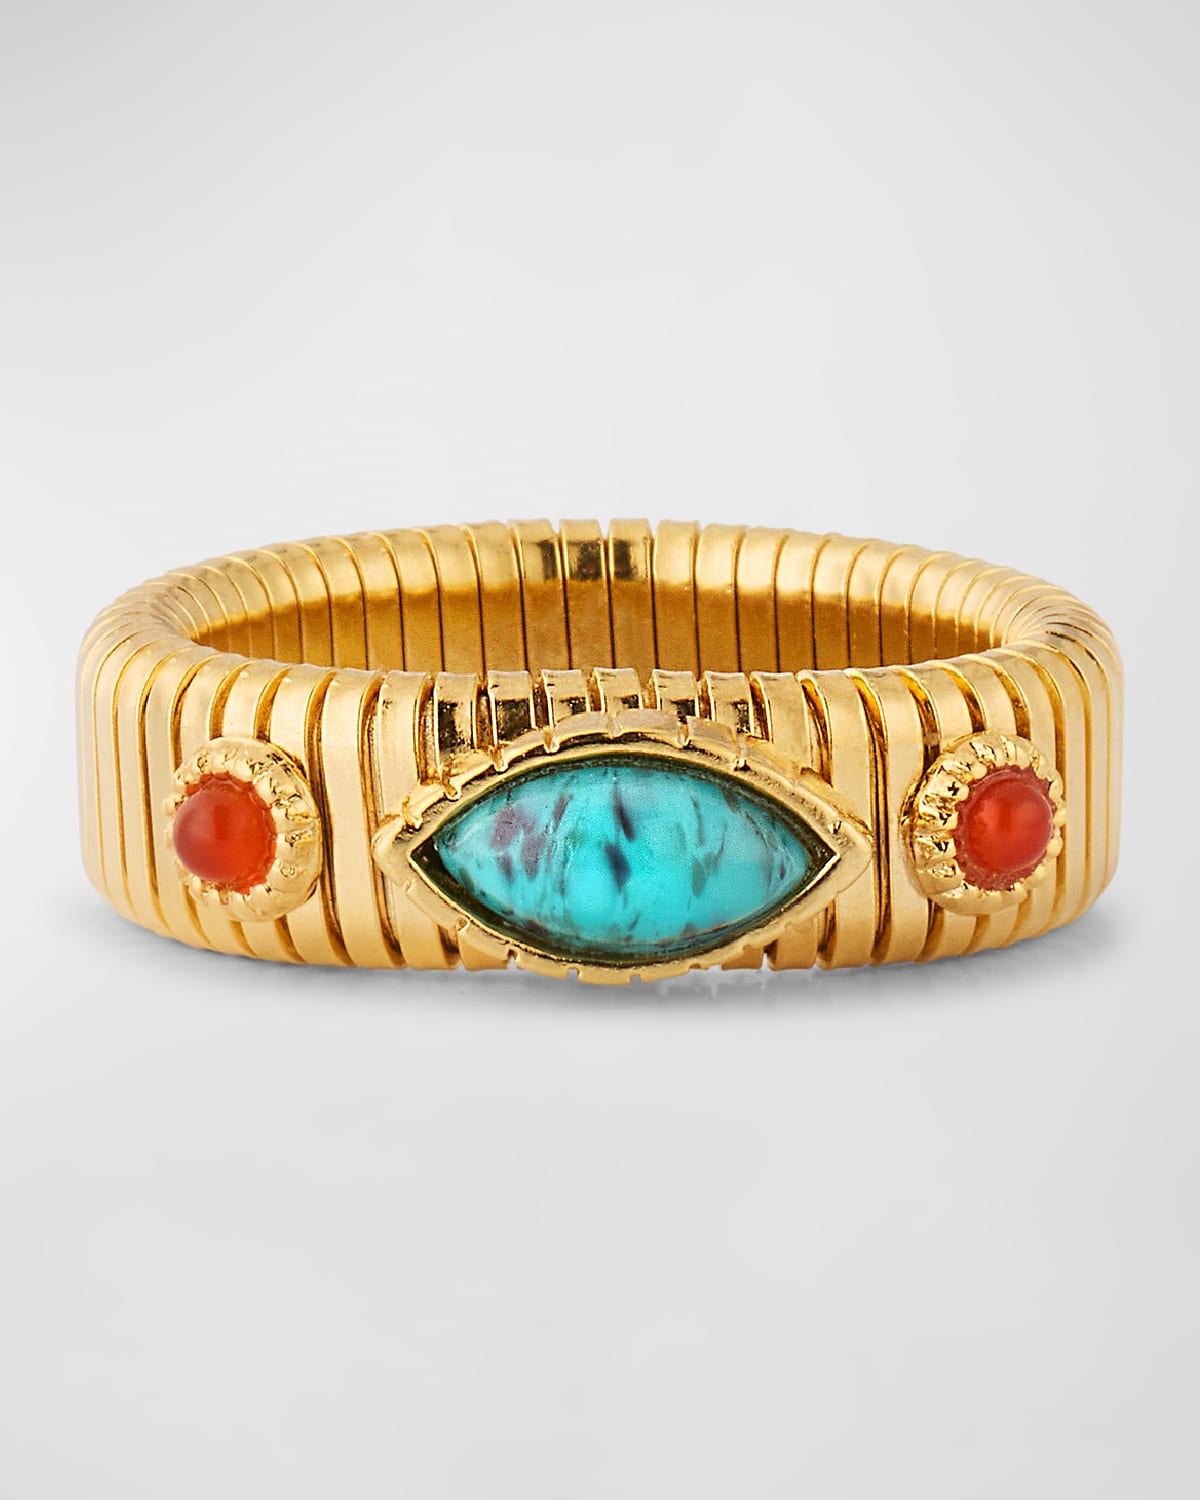 24K Gold-Plated Turquoise and Carnelian Flexible Ring